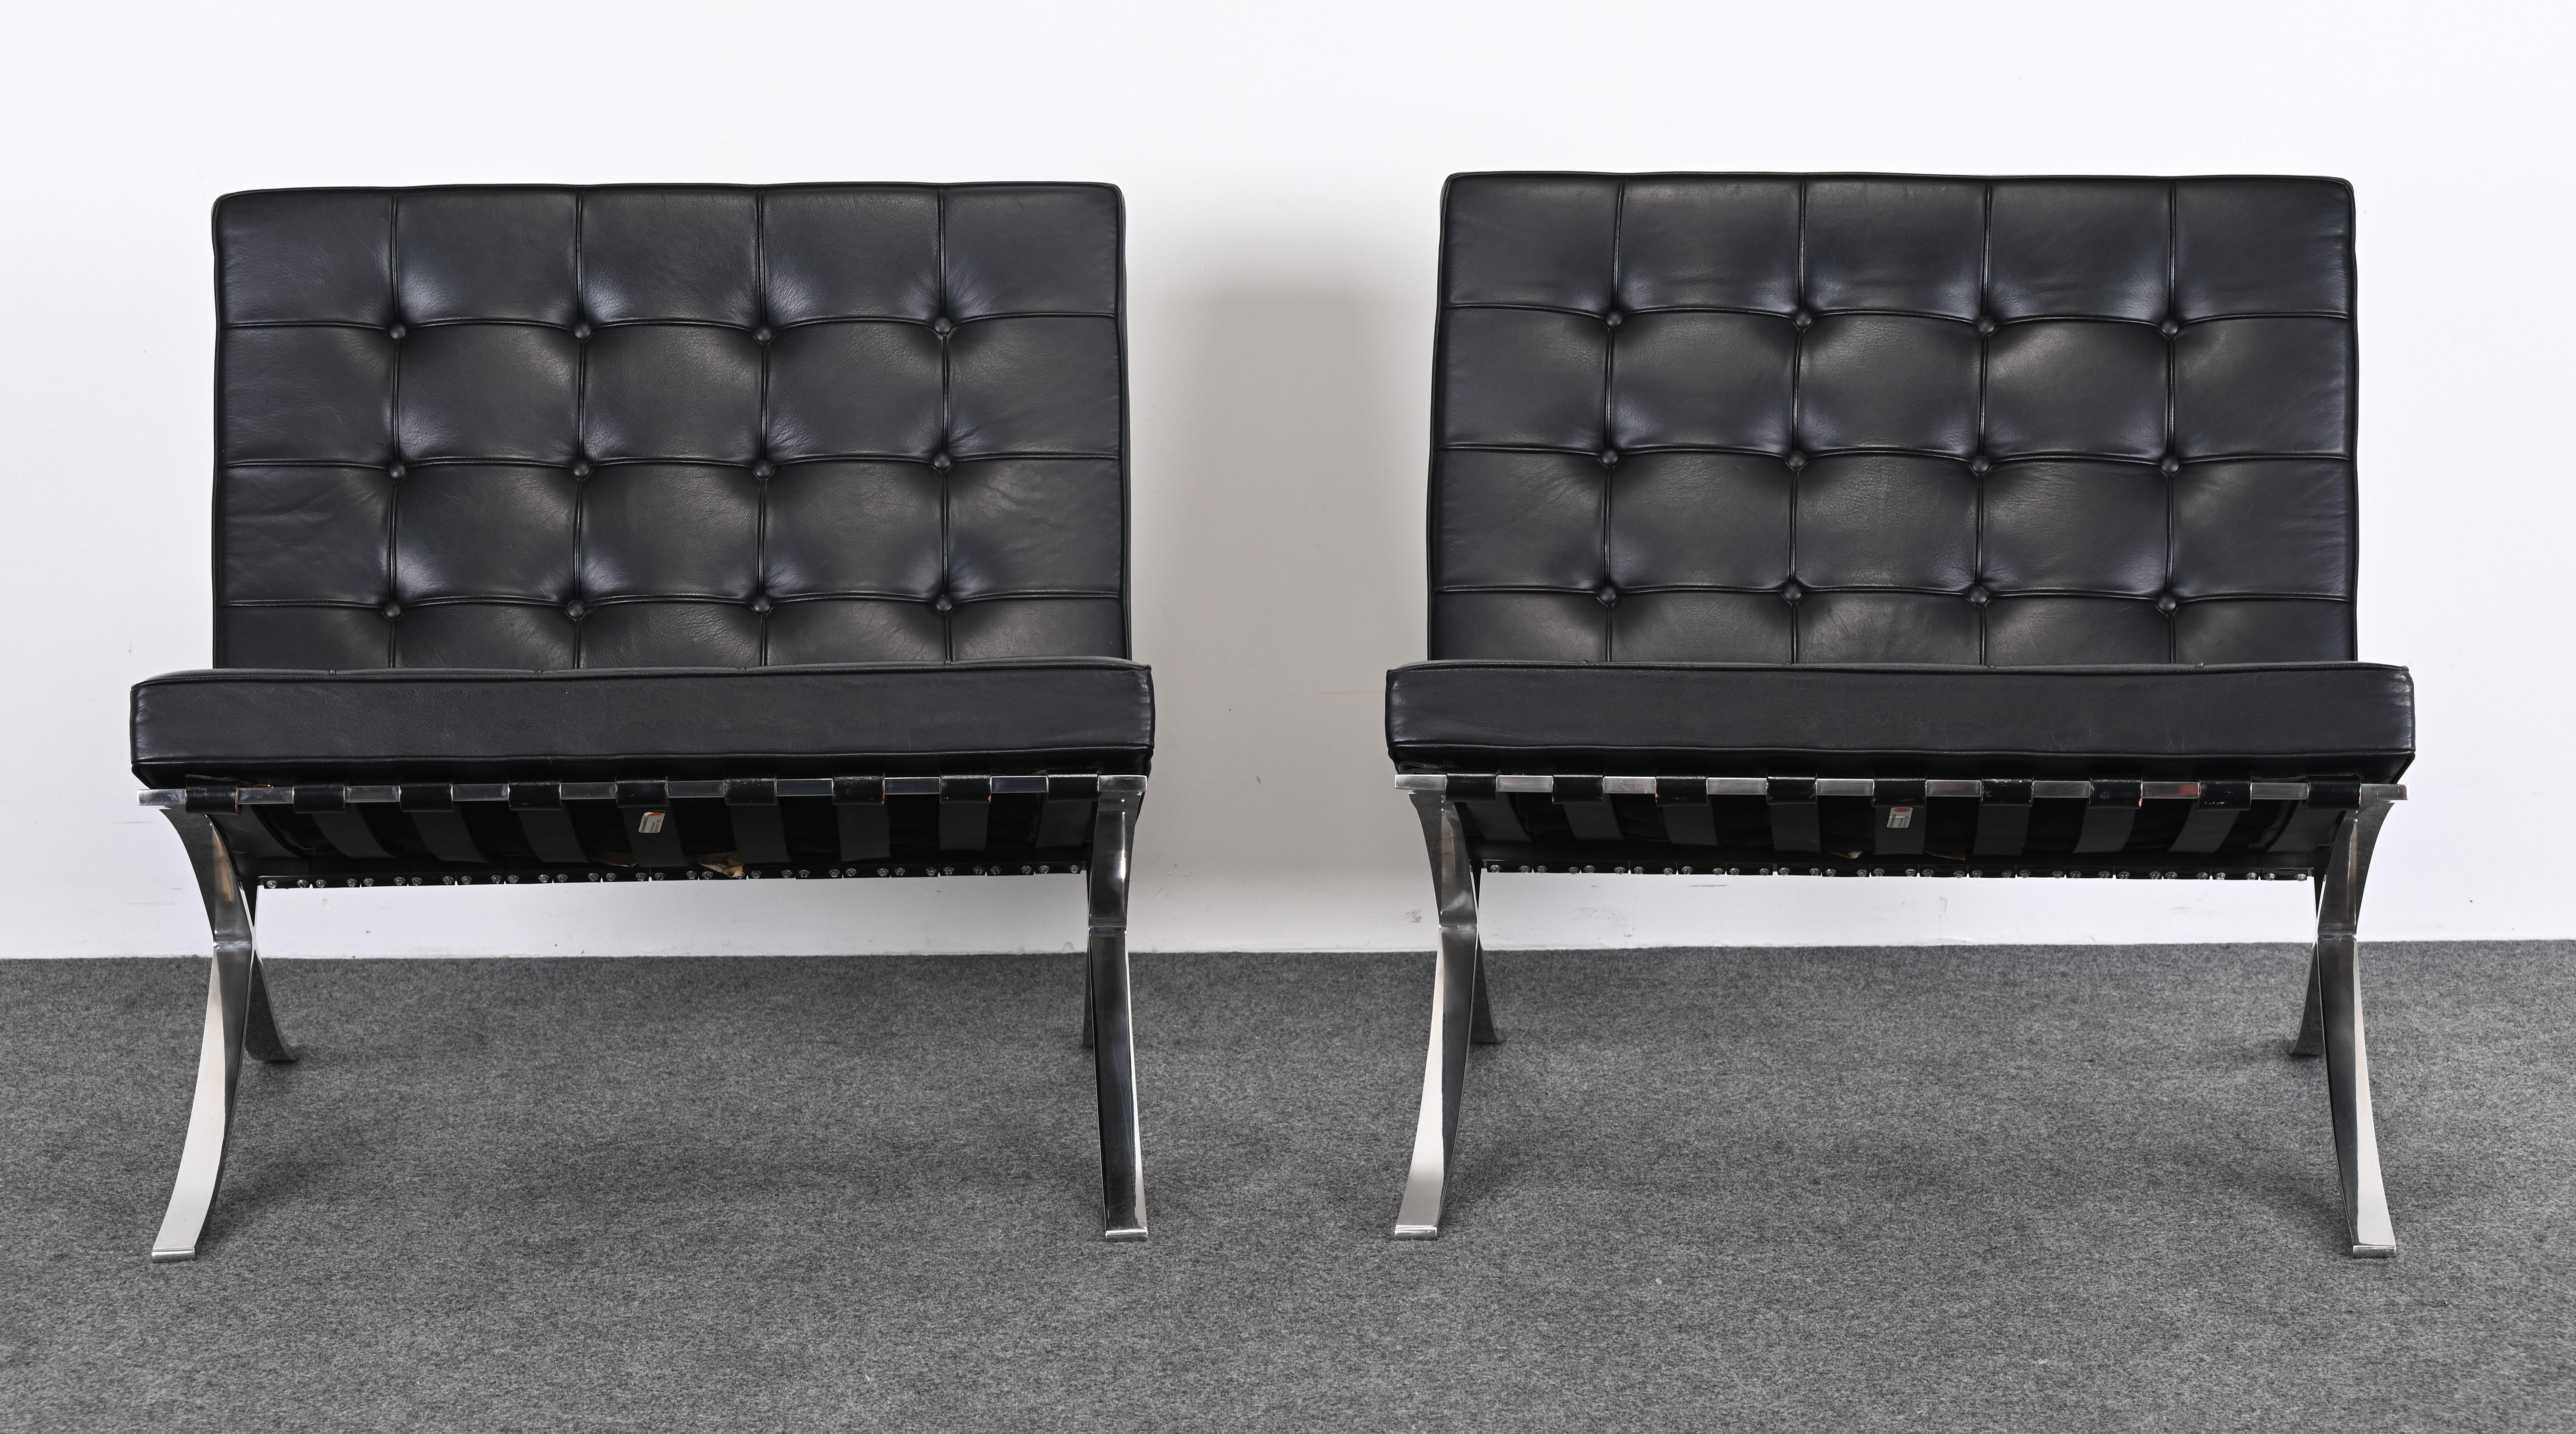 A luxurious pair of Mies van der Rohe Barcelona lounge chairs for Knoll Associates, Inc.  They are in very good vintage condition and are ready to place. The vintage leather is soft but firm and given they are over 60 years old they are in very good